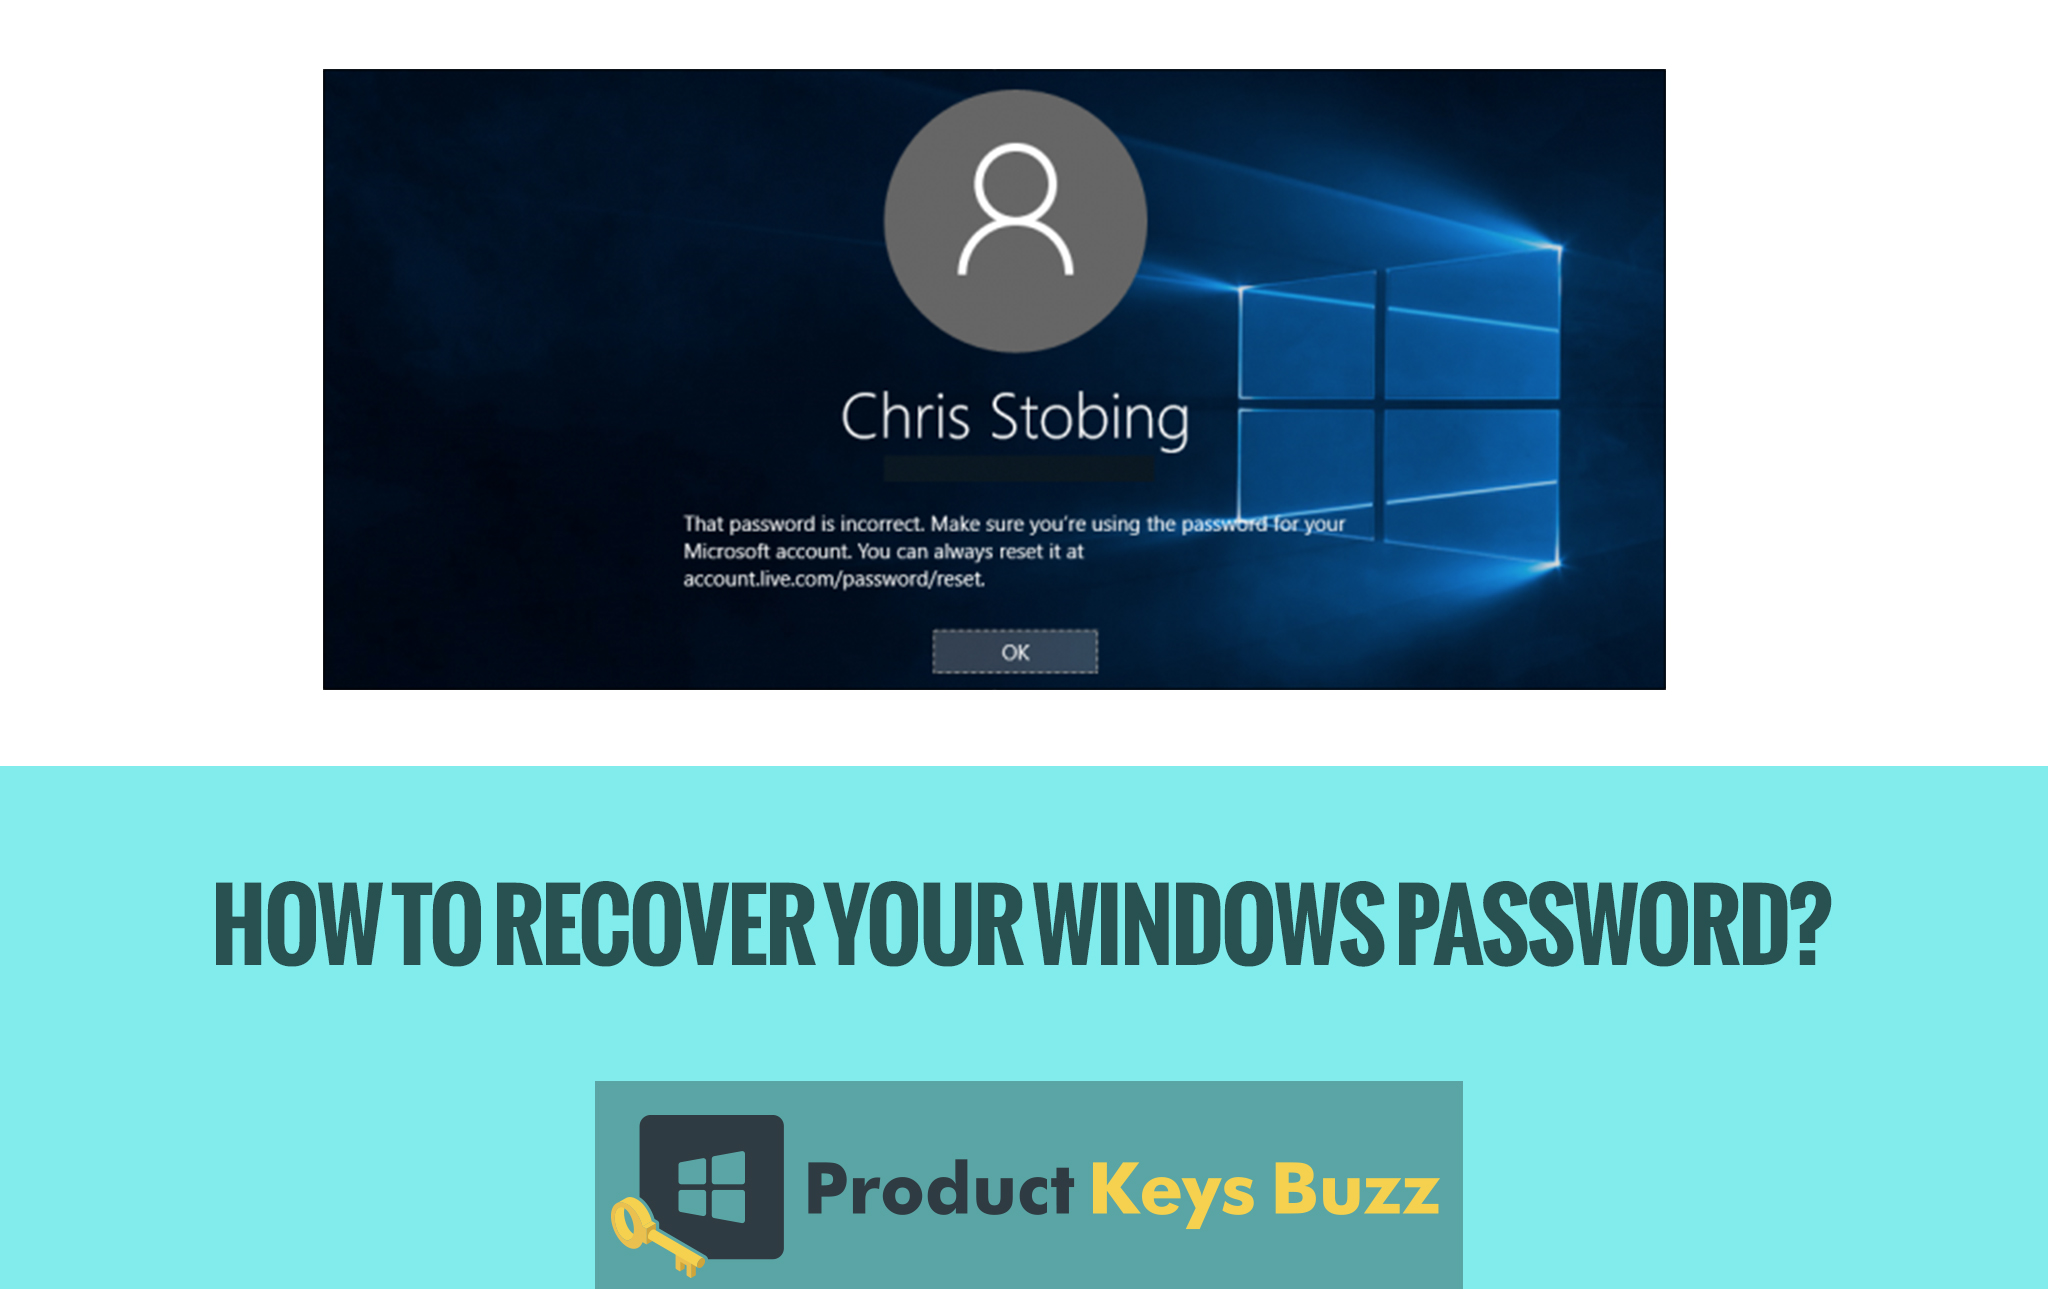 How to Recover Your Windows Password